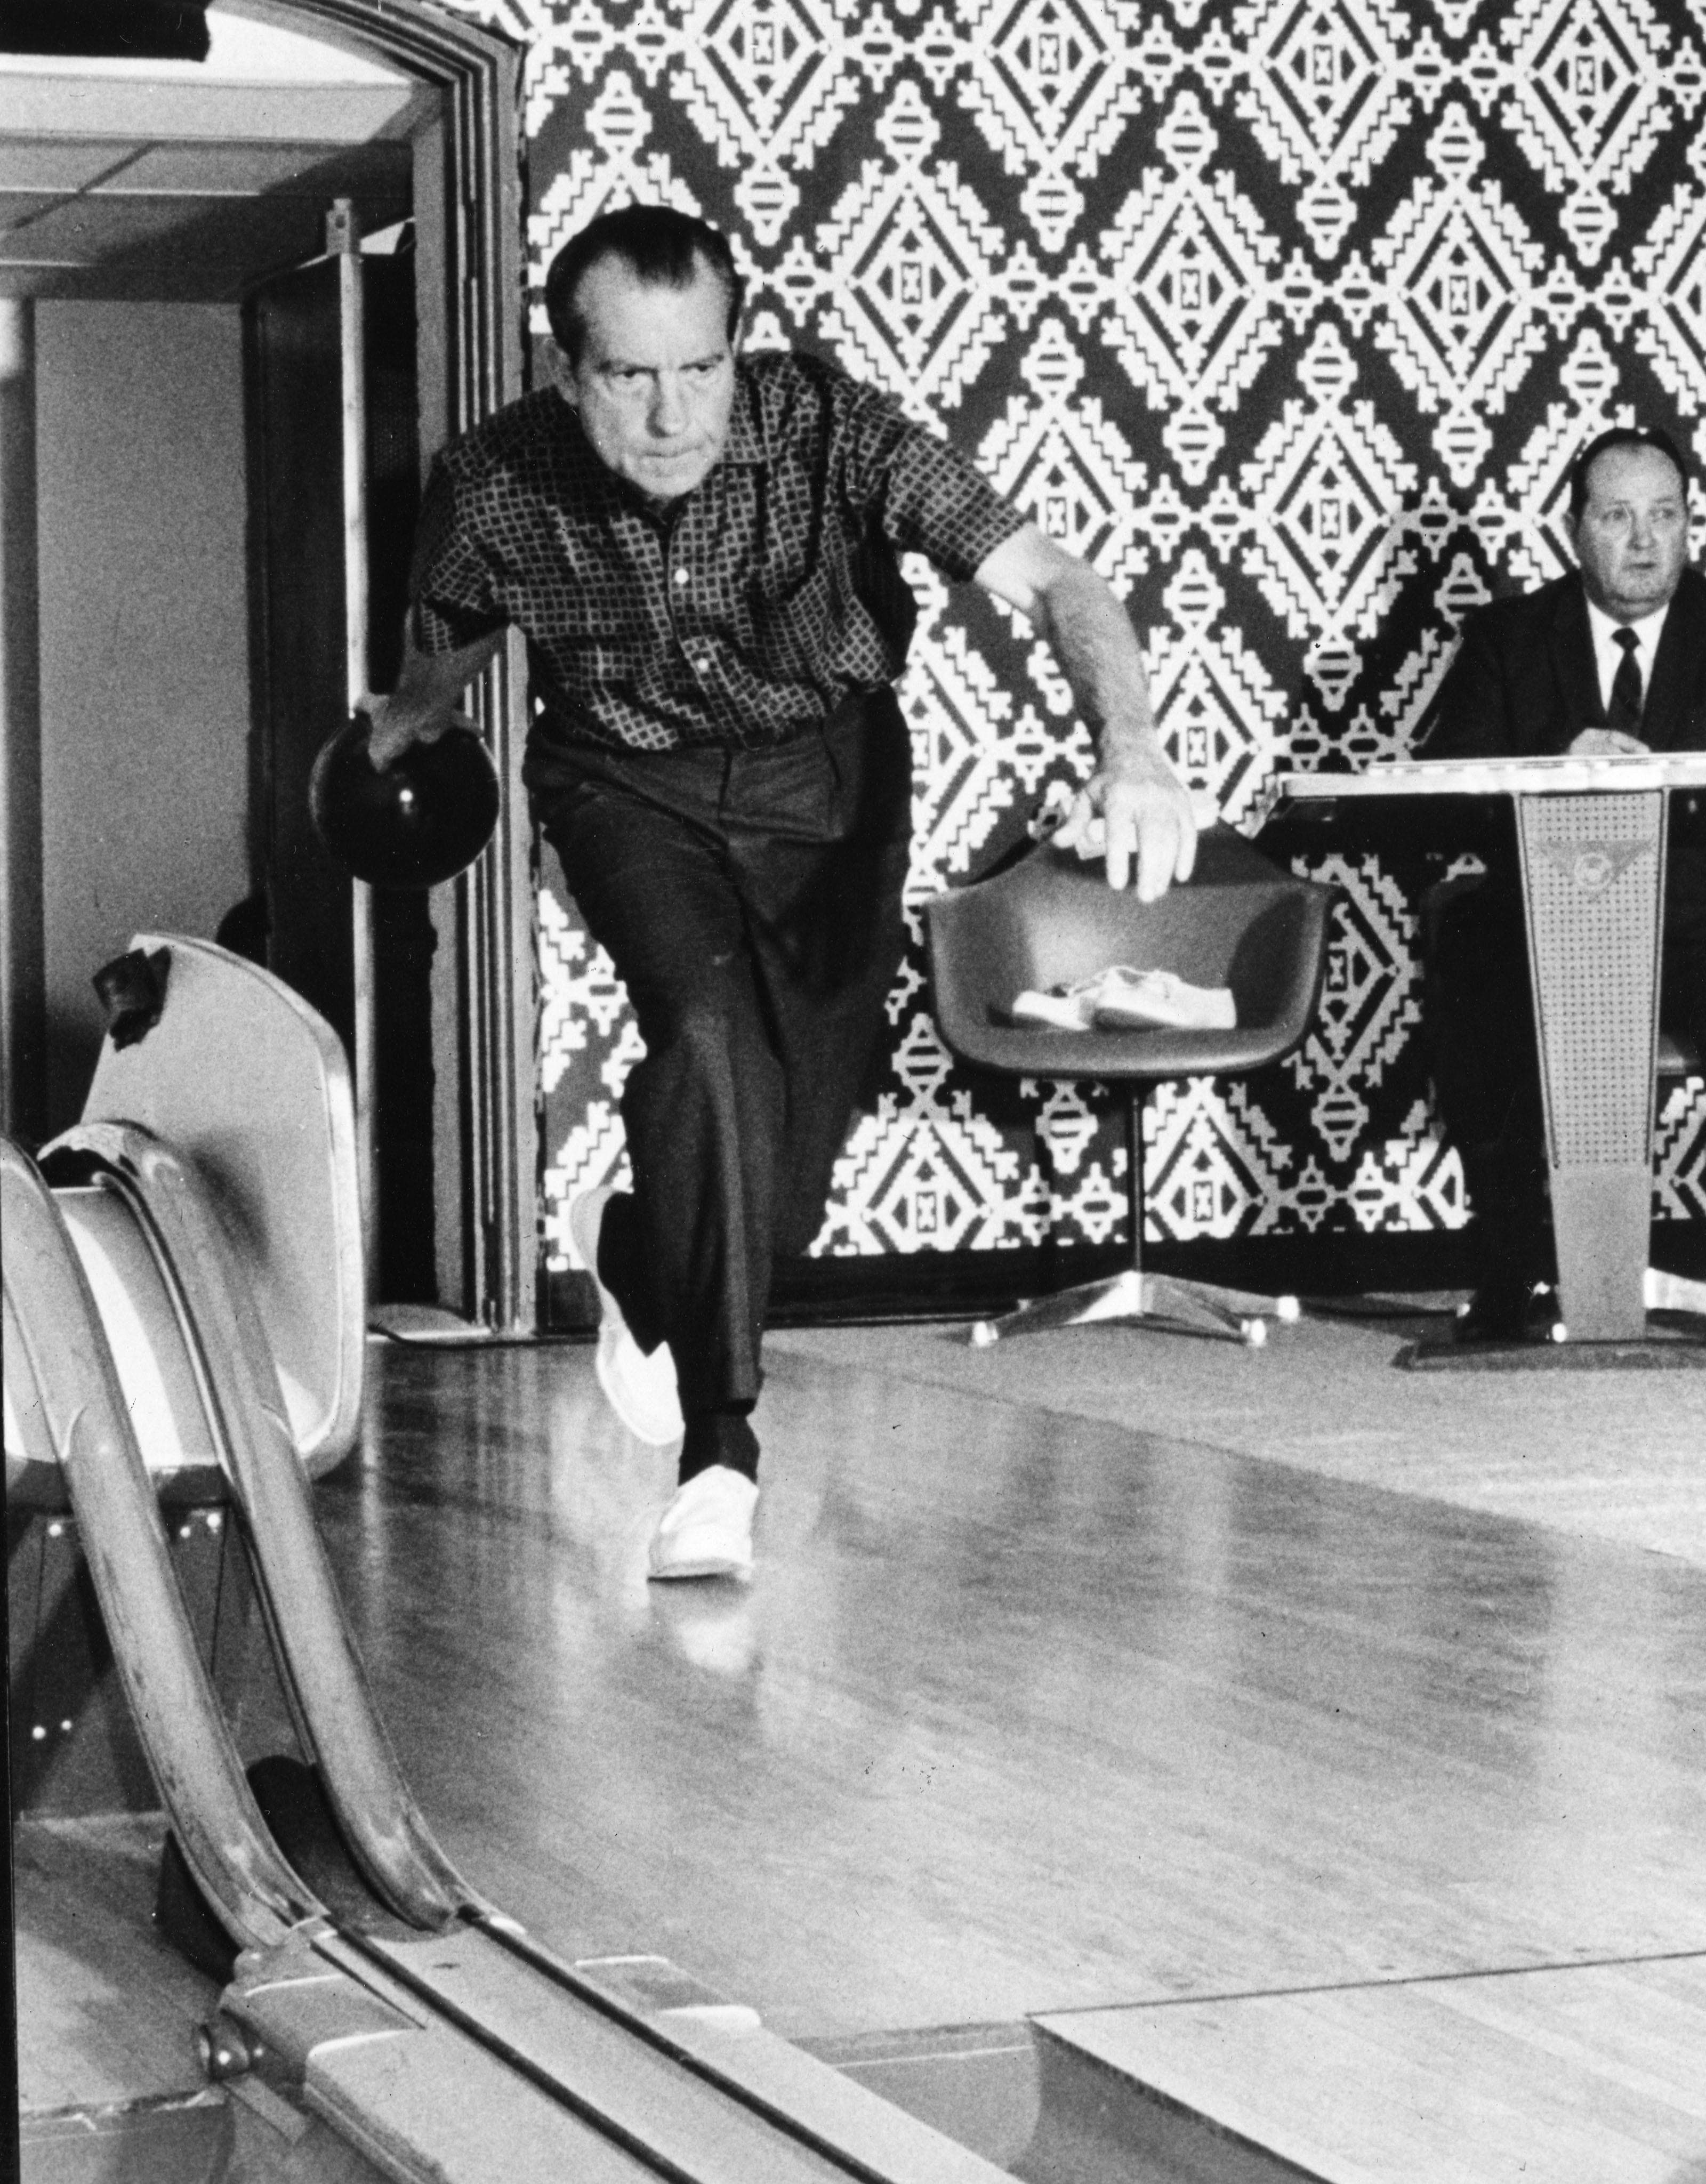 Richard Nixon Bowling on Random Rare Photos Of US Presidents That Most People Haven't Seen